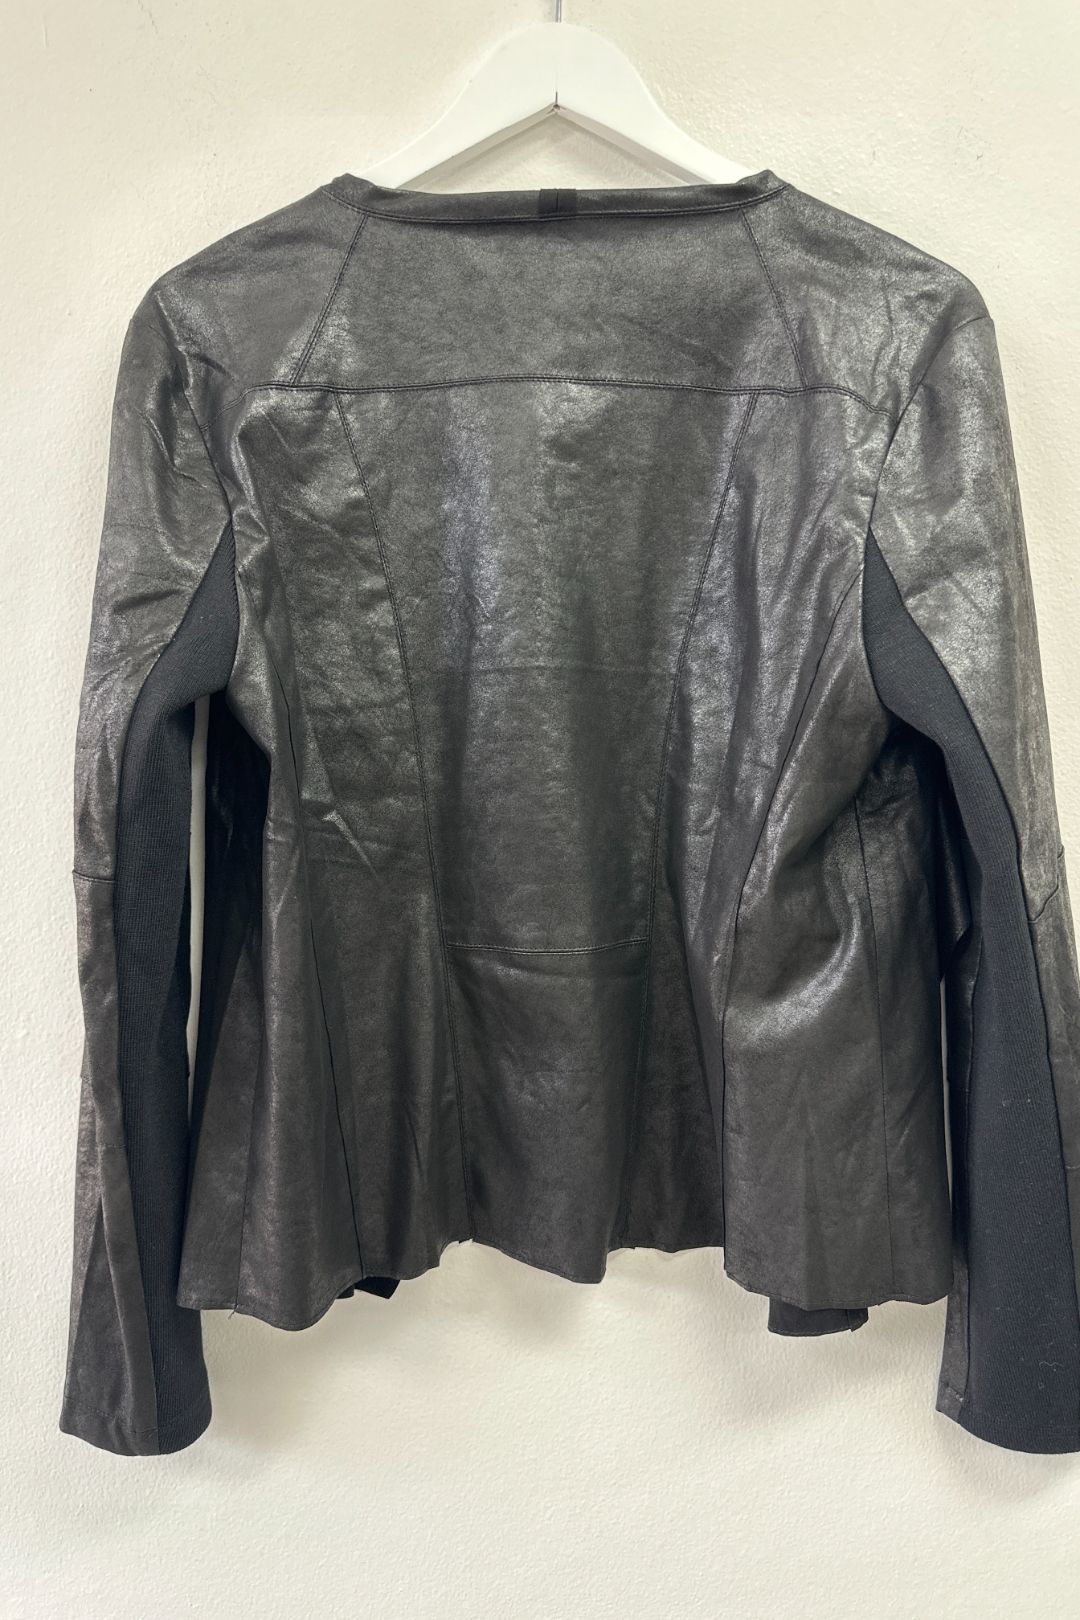 Brave and True Black Faux Leather Empire Jacket